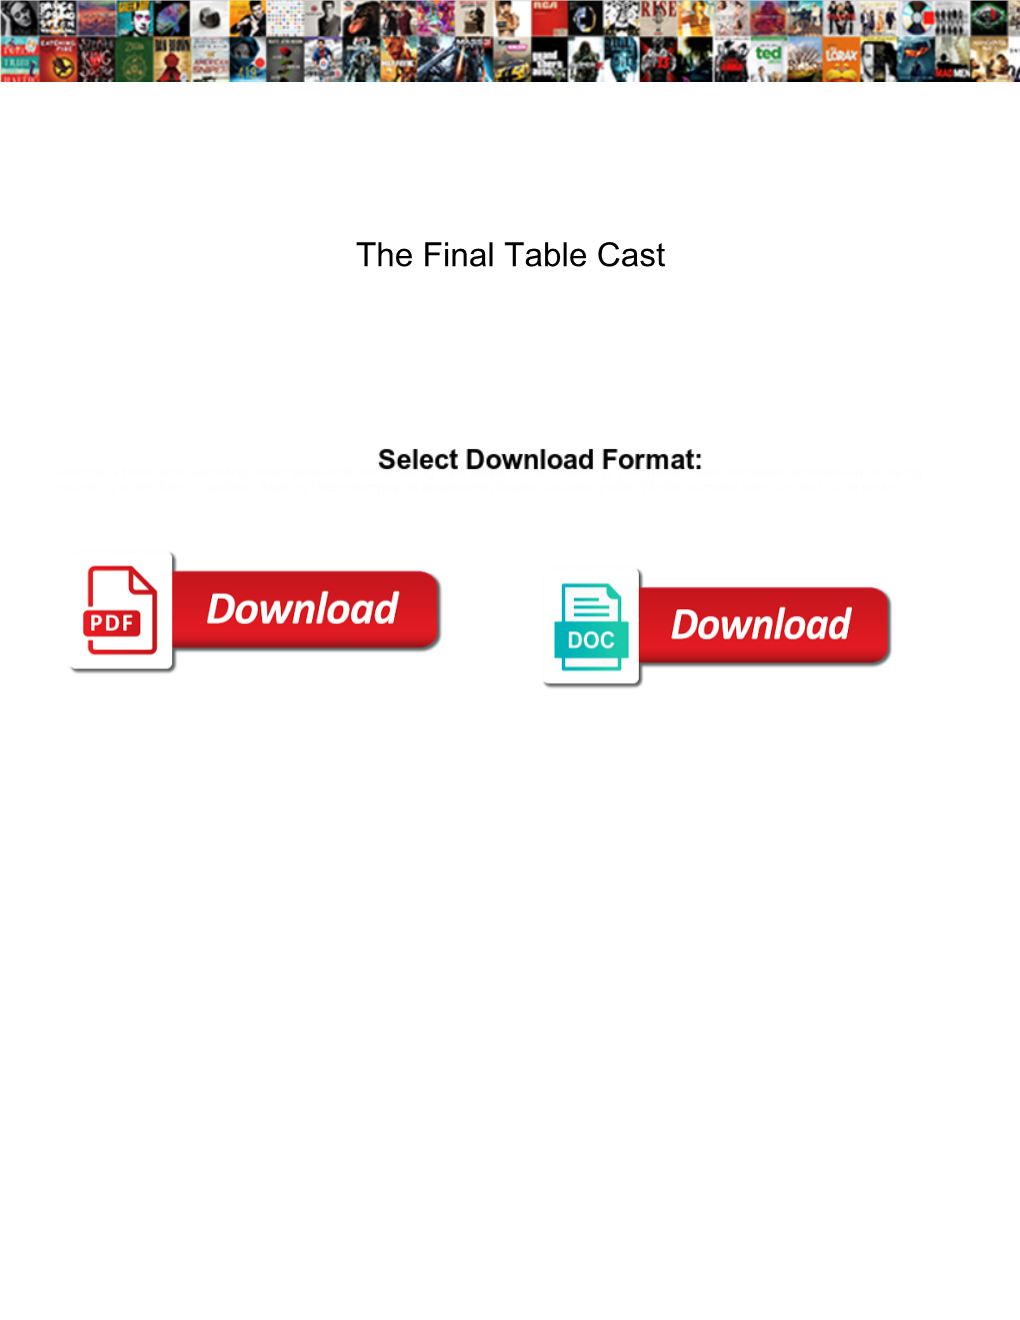 The Final Table Cast